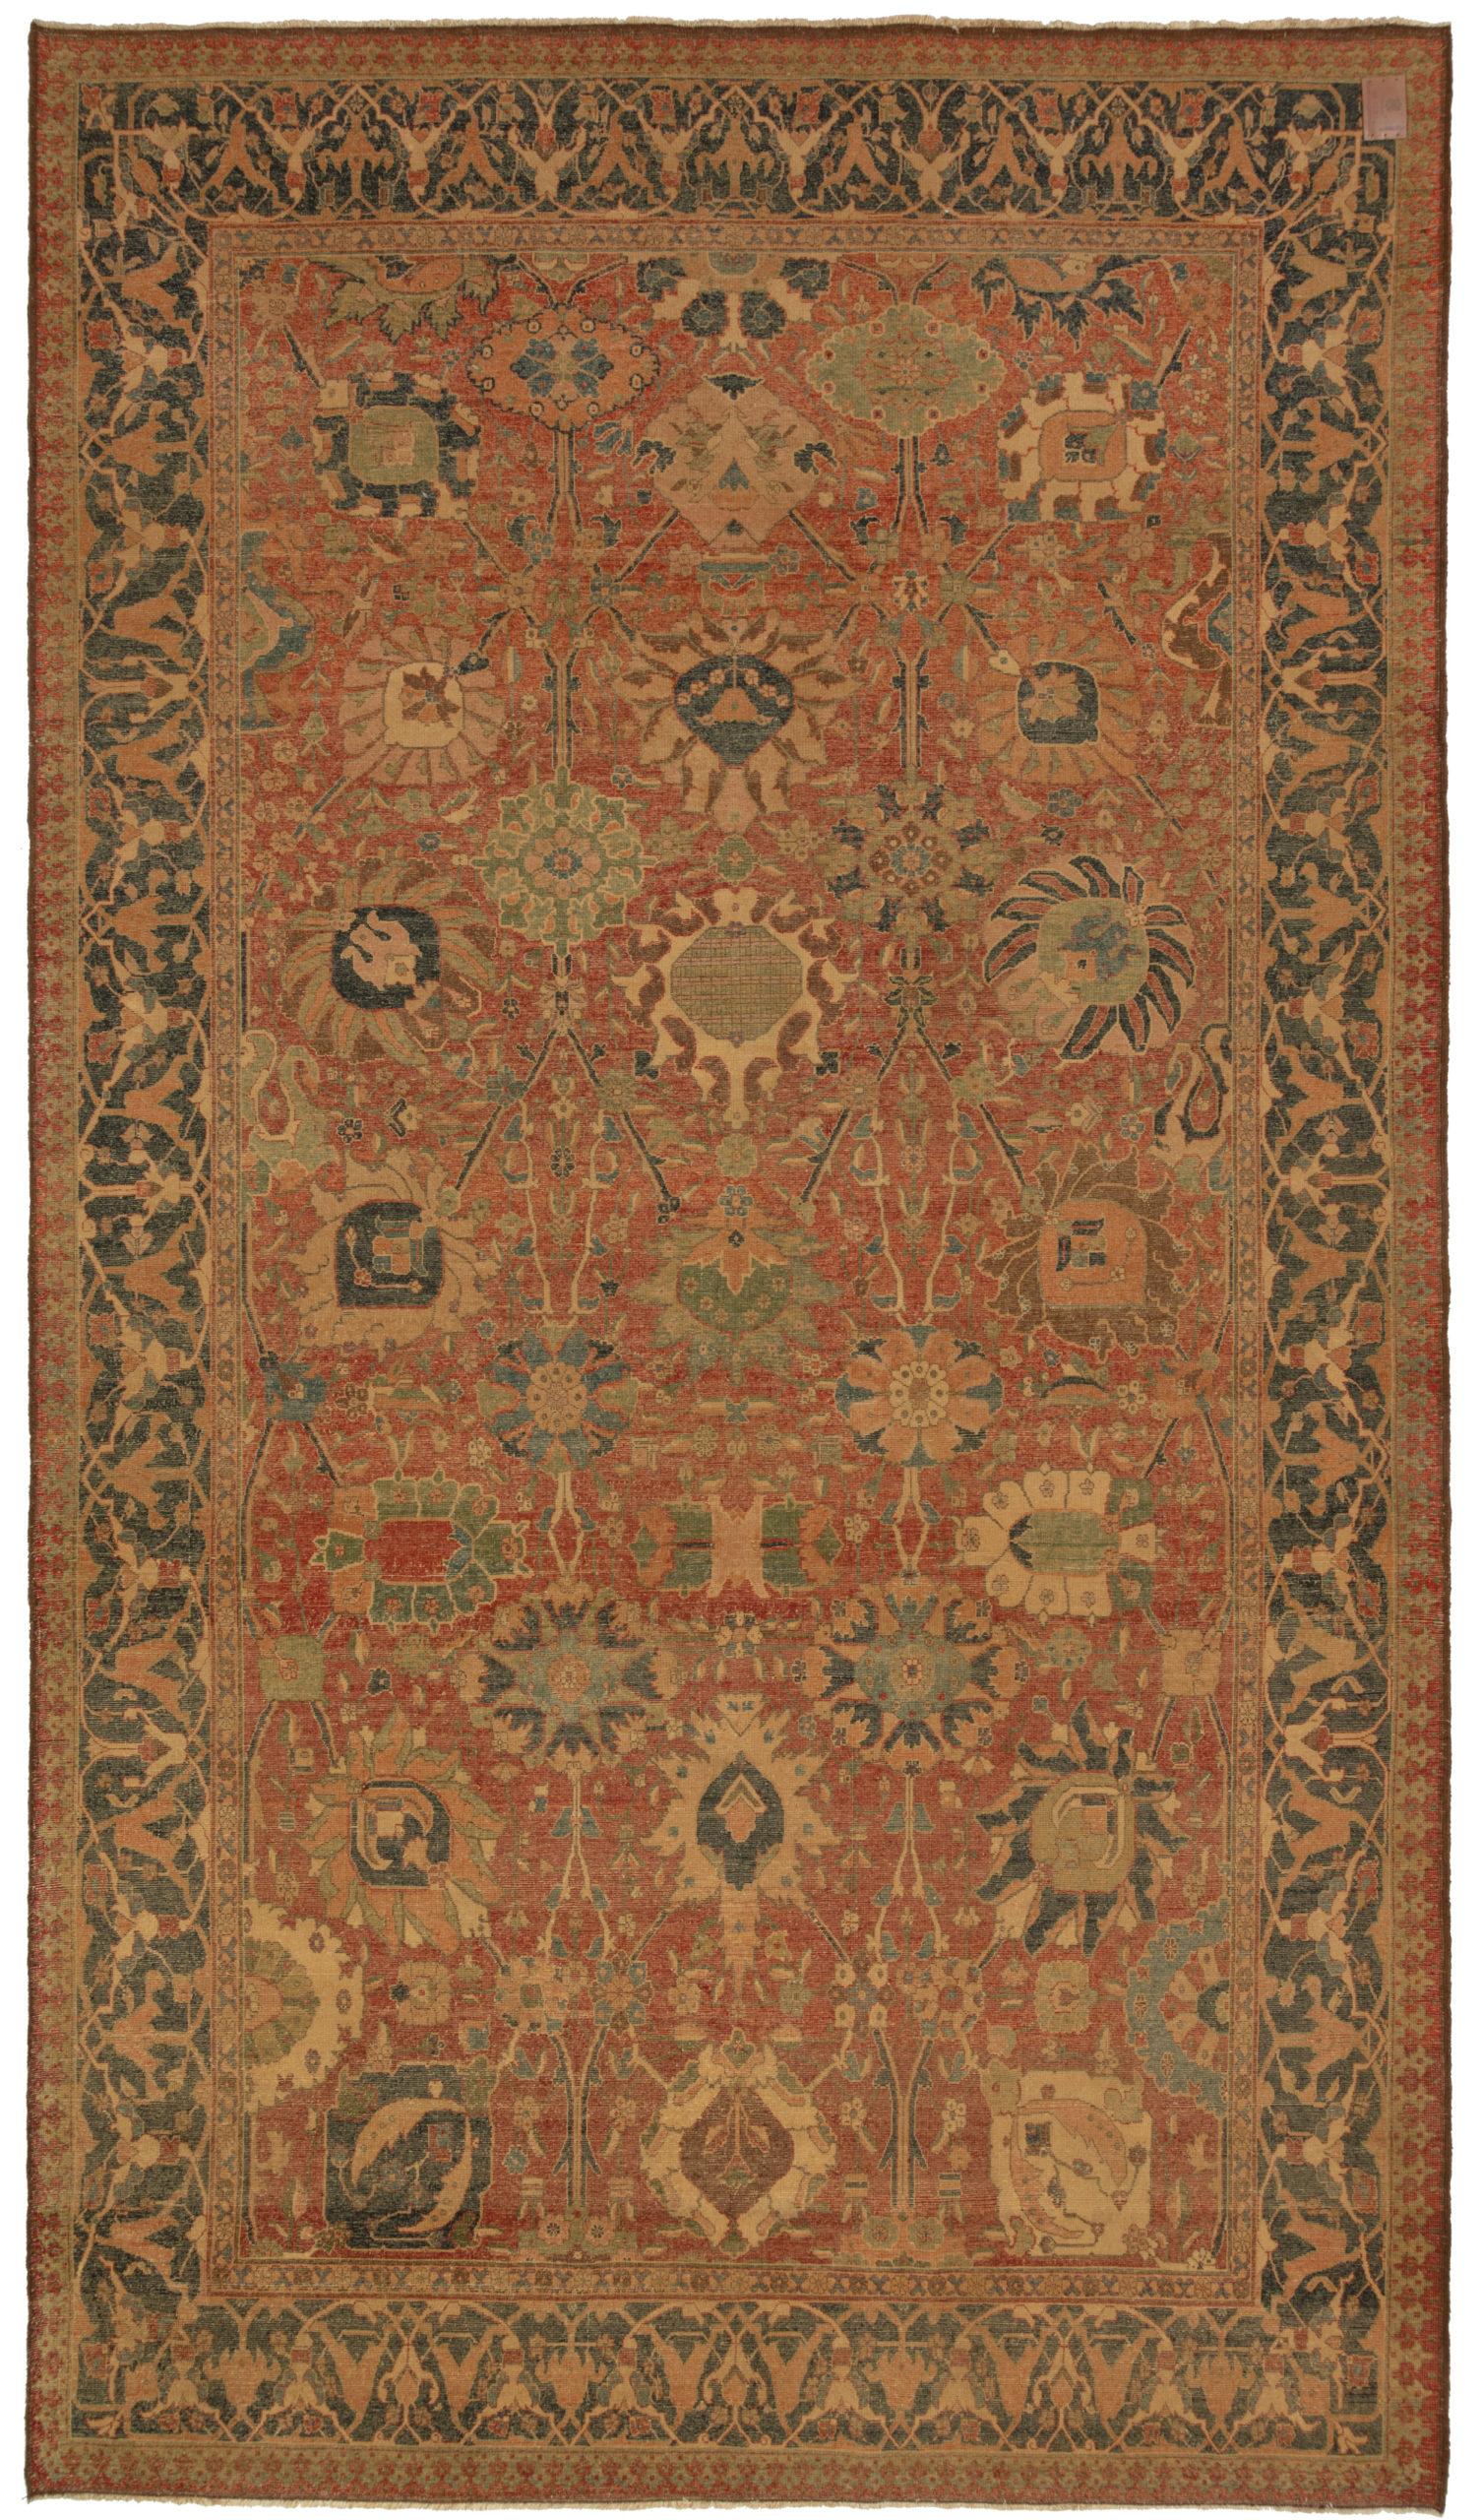 The design source of the carpet comes from the book by Dimand, Maurice S., and Jean Mailey. Oriental Rugs in the Metropolitan Museum of Art. New York: The Metropolitan Museum of Art, 1973. no. 38, p. 110, ill. This is a vase technique with rows of